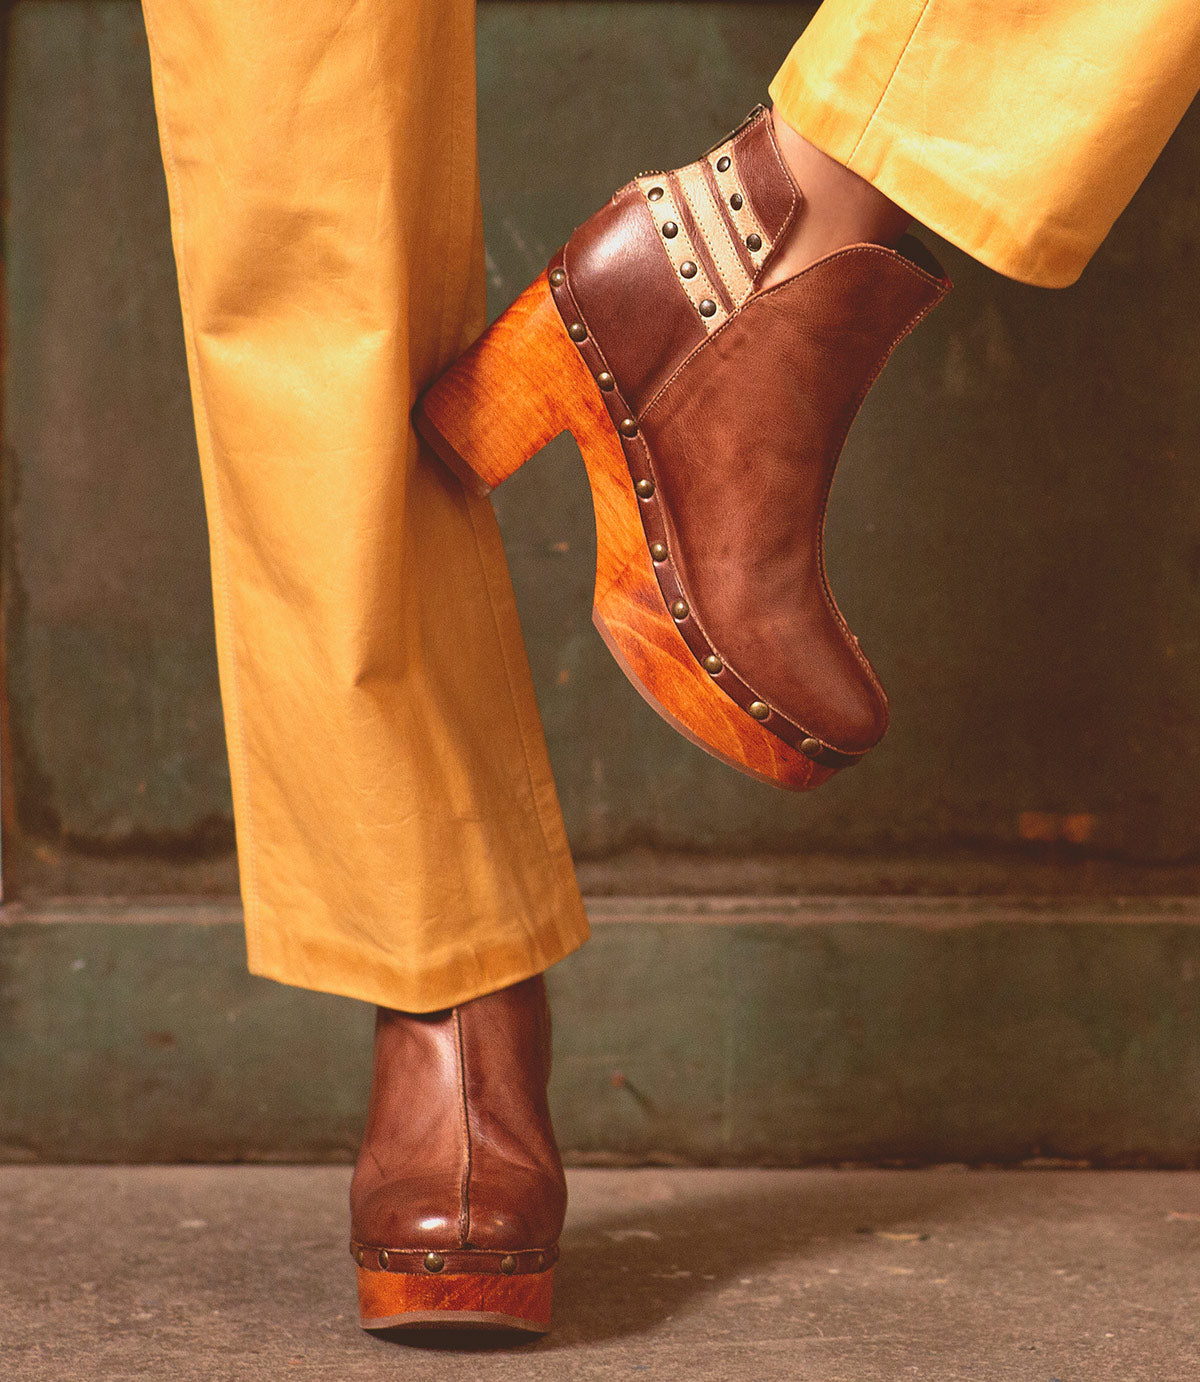 A woman wearing yellow Viena pants and brown leather Bed Stu booties with stud detail.